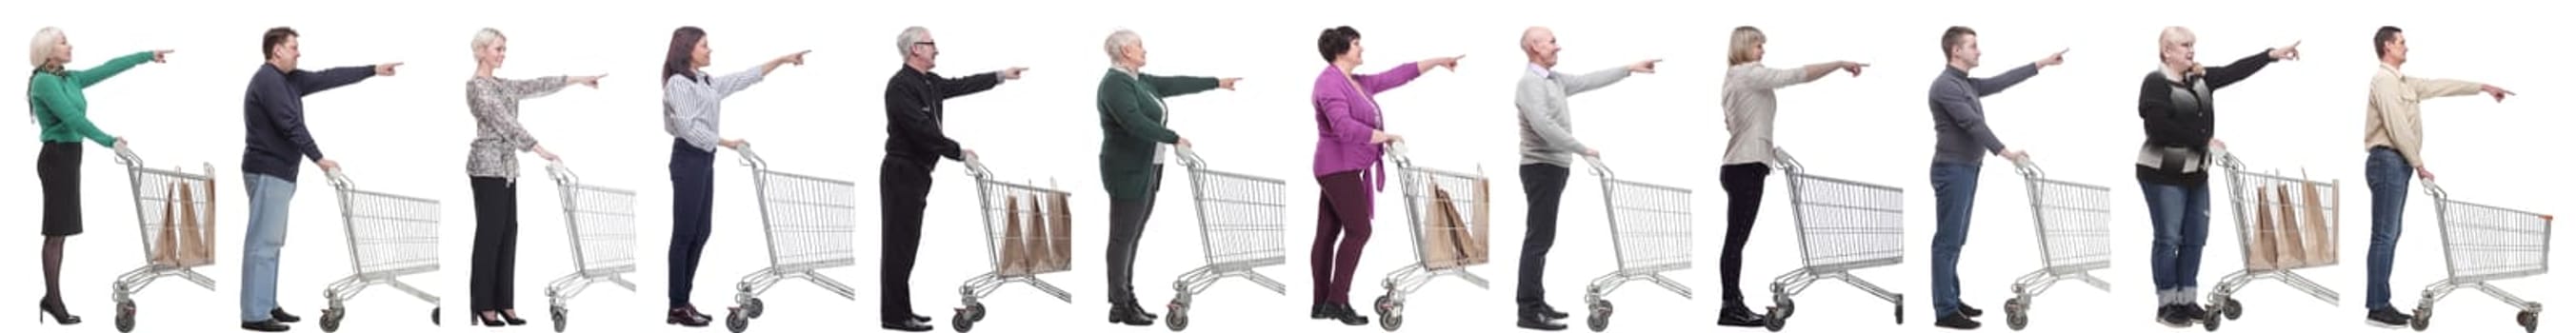 a group of people with a shopping cart point their fingers in front of them on a white background